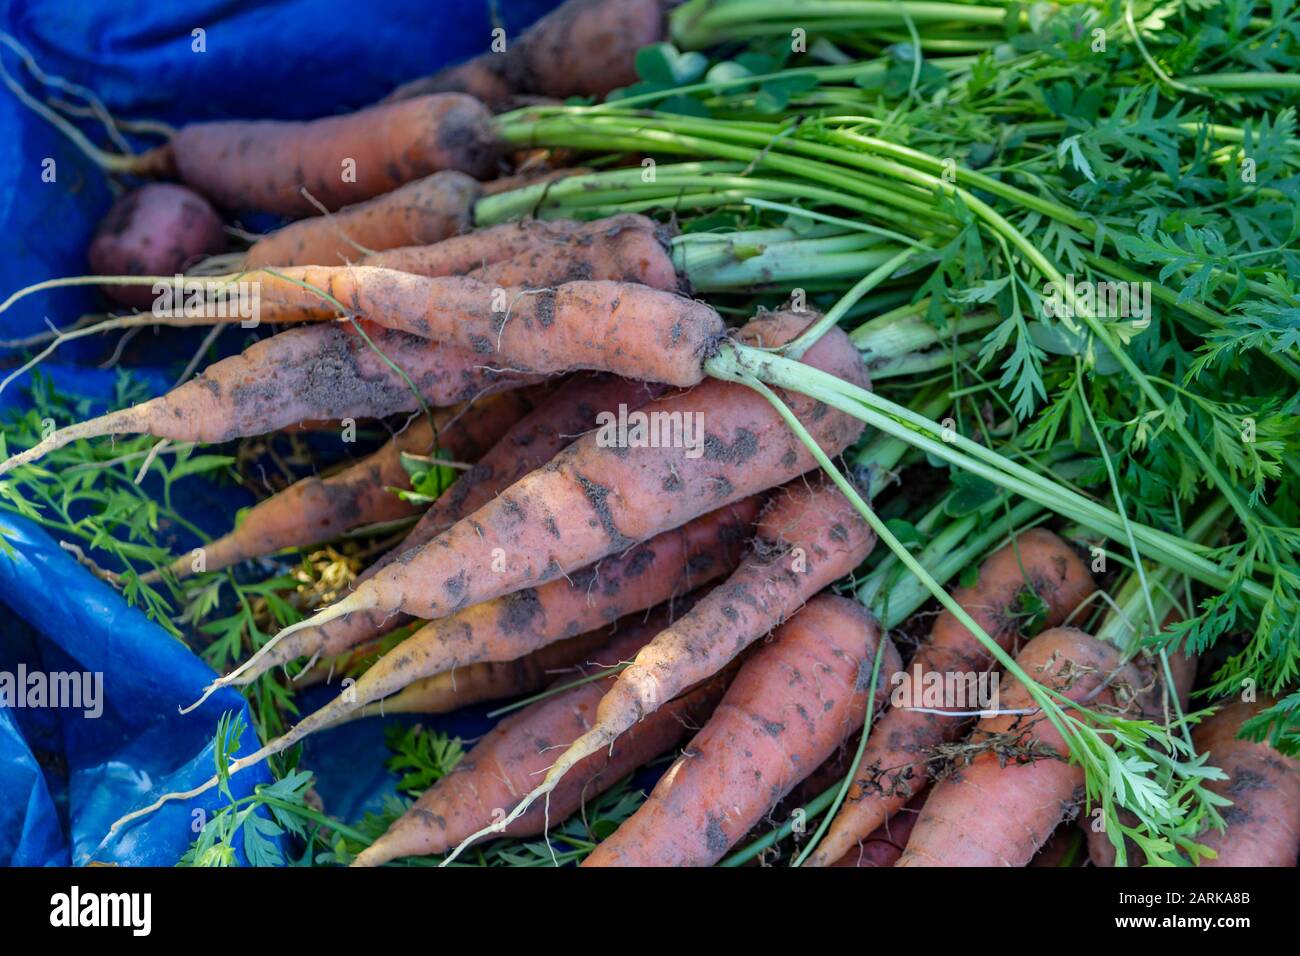 Fresh and organic carrots harvested from the garden. Stock Photo